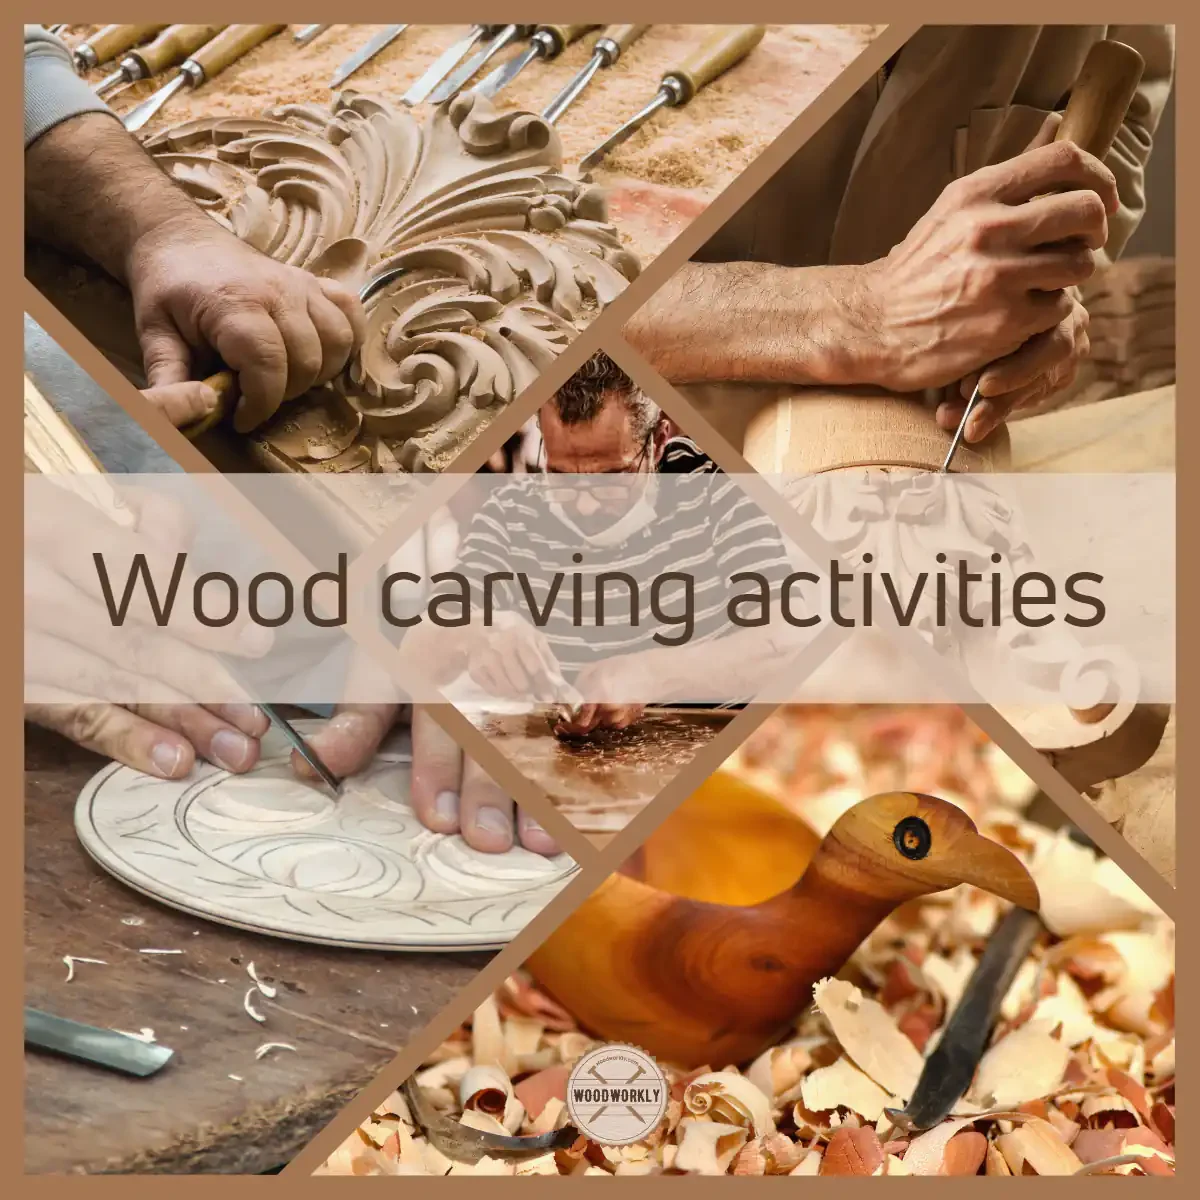 Wood carving activities